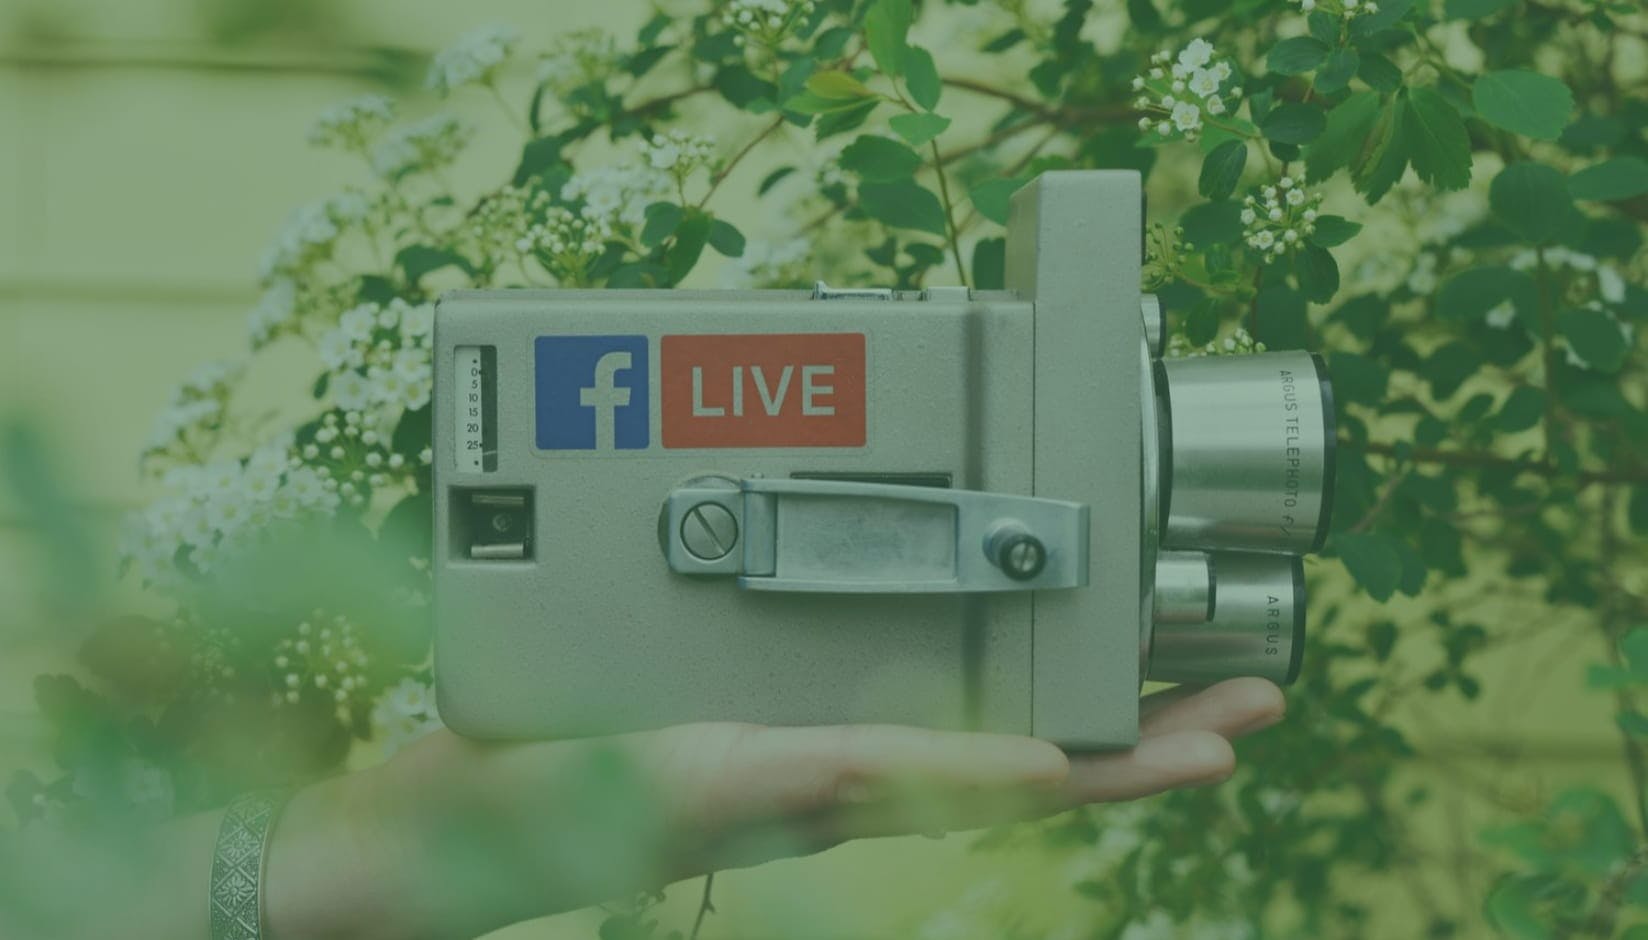 retro video camera with Facebook Live logo for coworking space promotion